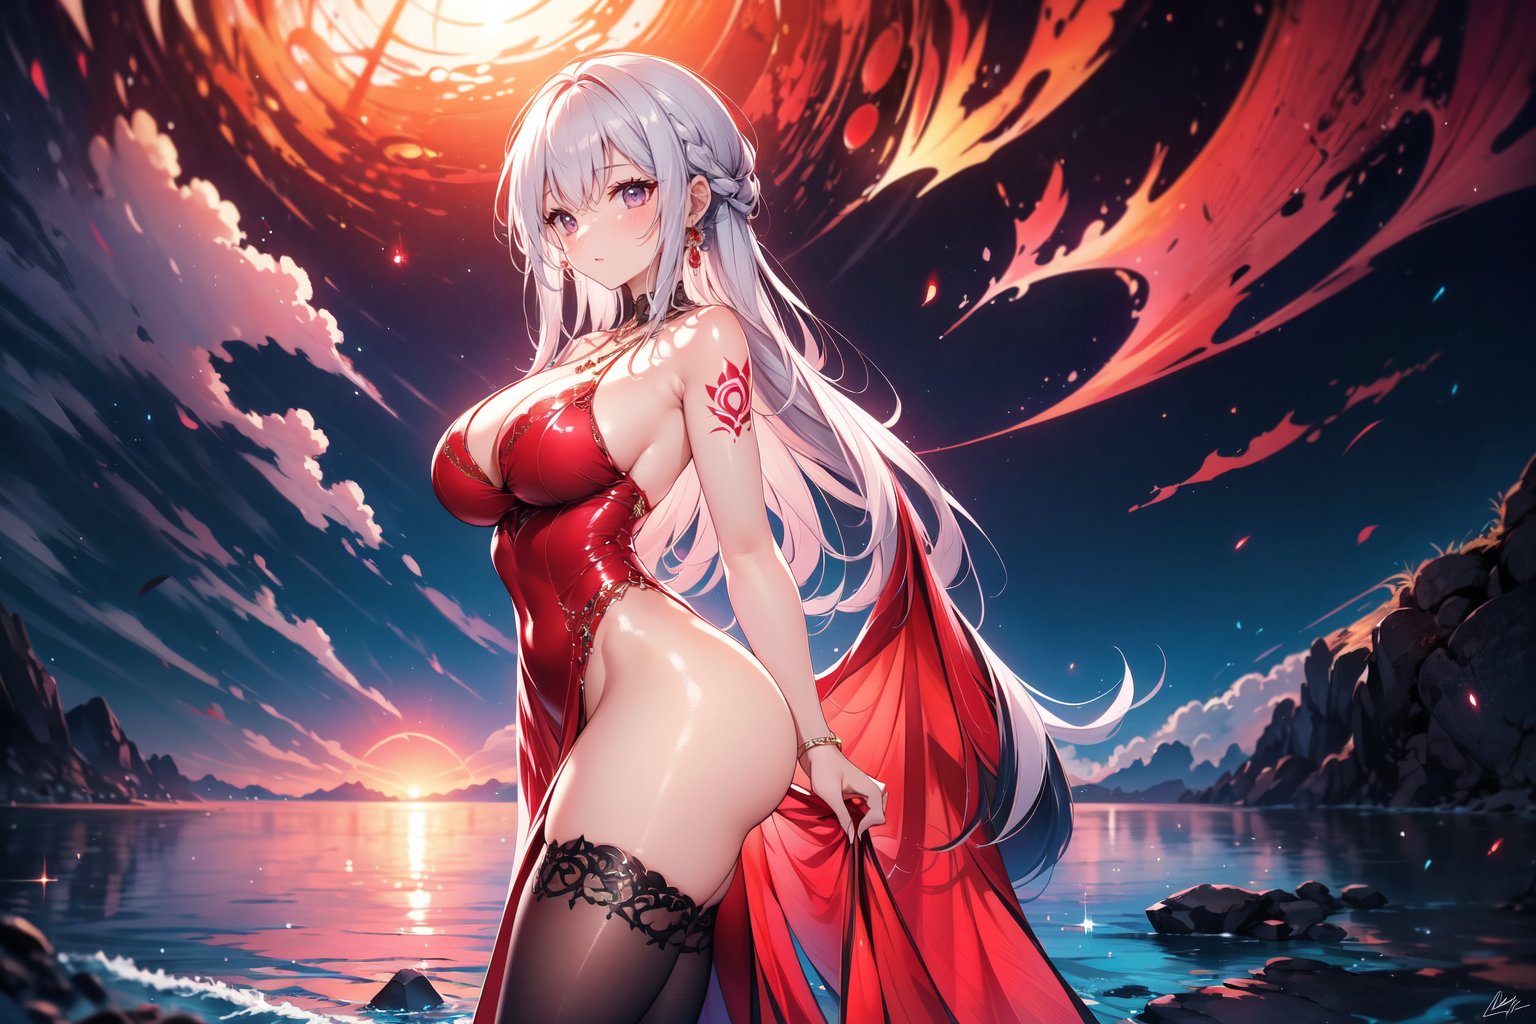 A stunning young woman, with shimmering silver locks cascading down her back in loose waves, stands confidently at the water's edge. The breastless evening gown clings to her toned physique, while bold red stockings and towering high heels add a touch of provocative glamour. A delicate necklace adorns her neck, drawing attention to the striking wing tattoo that wraps around her shoulder blade, as she gazes out at the endless blue horizon.